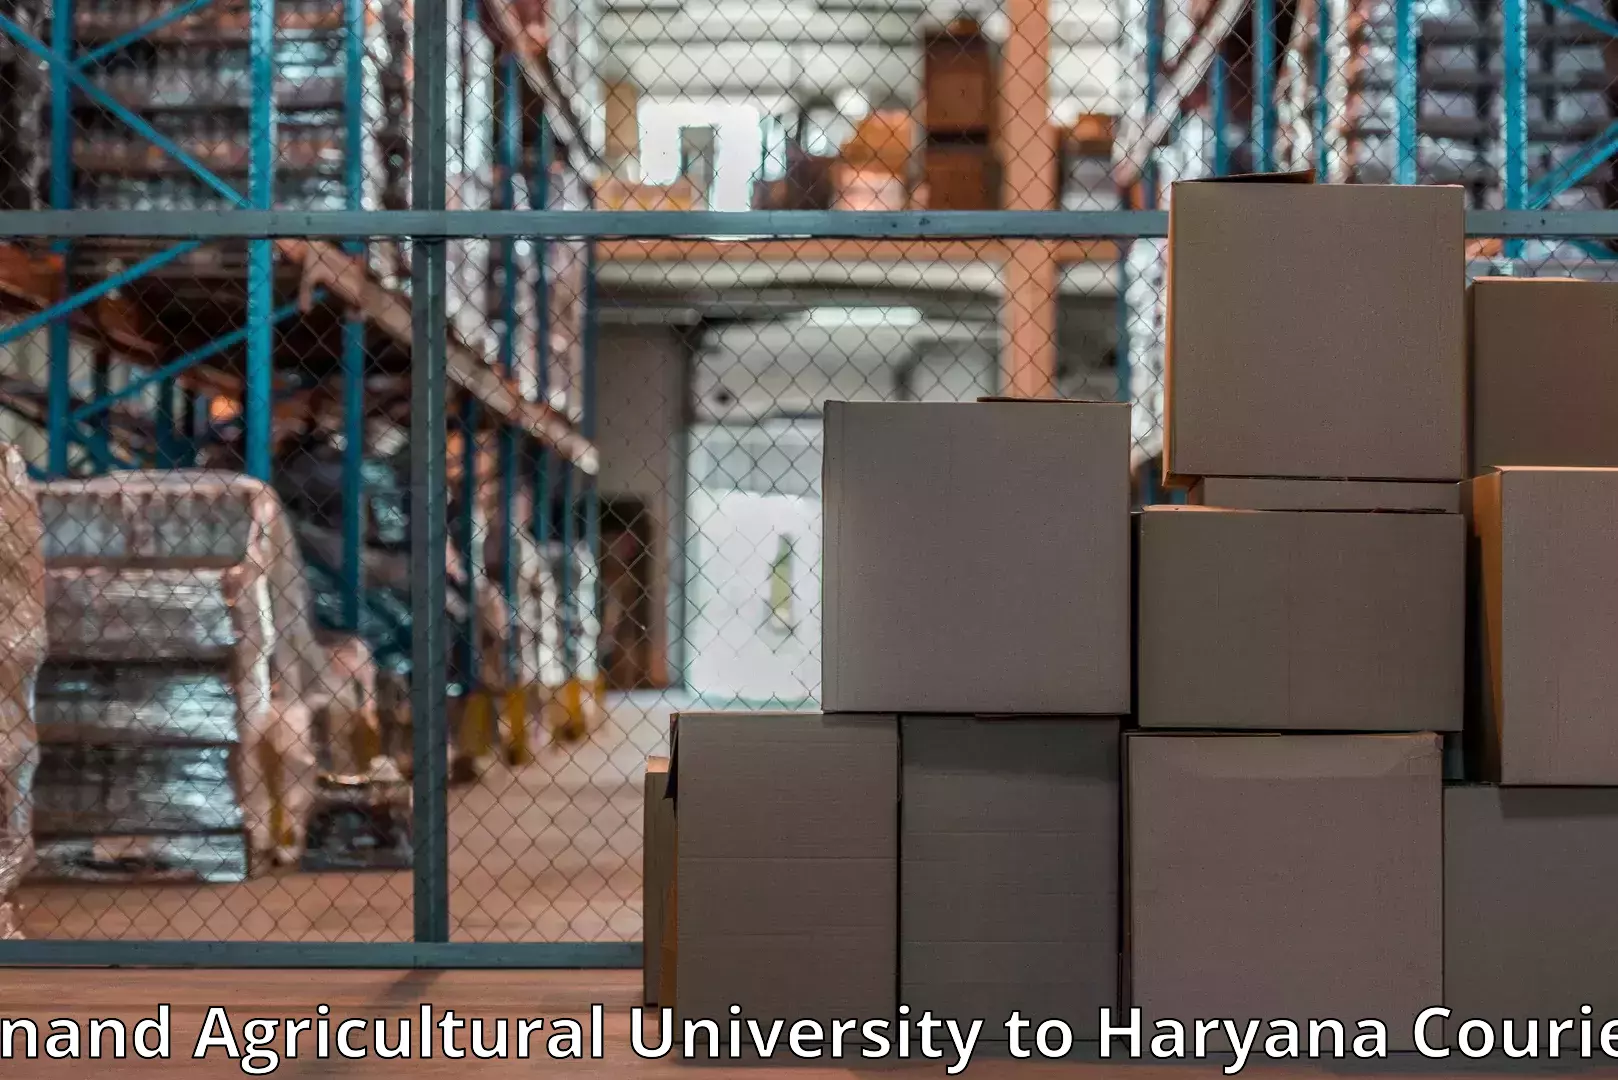 Professional moving assistance Anand Agricultural University to Sirsa